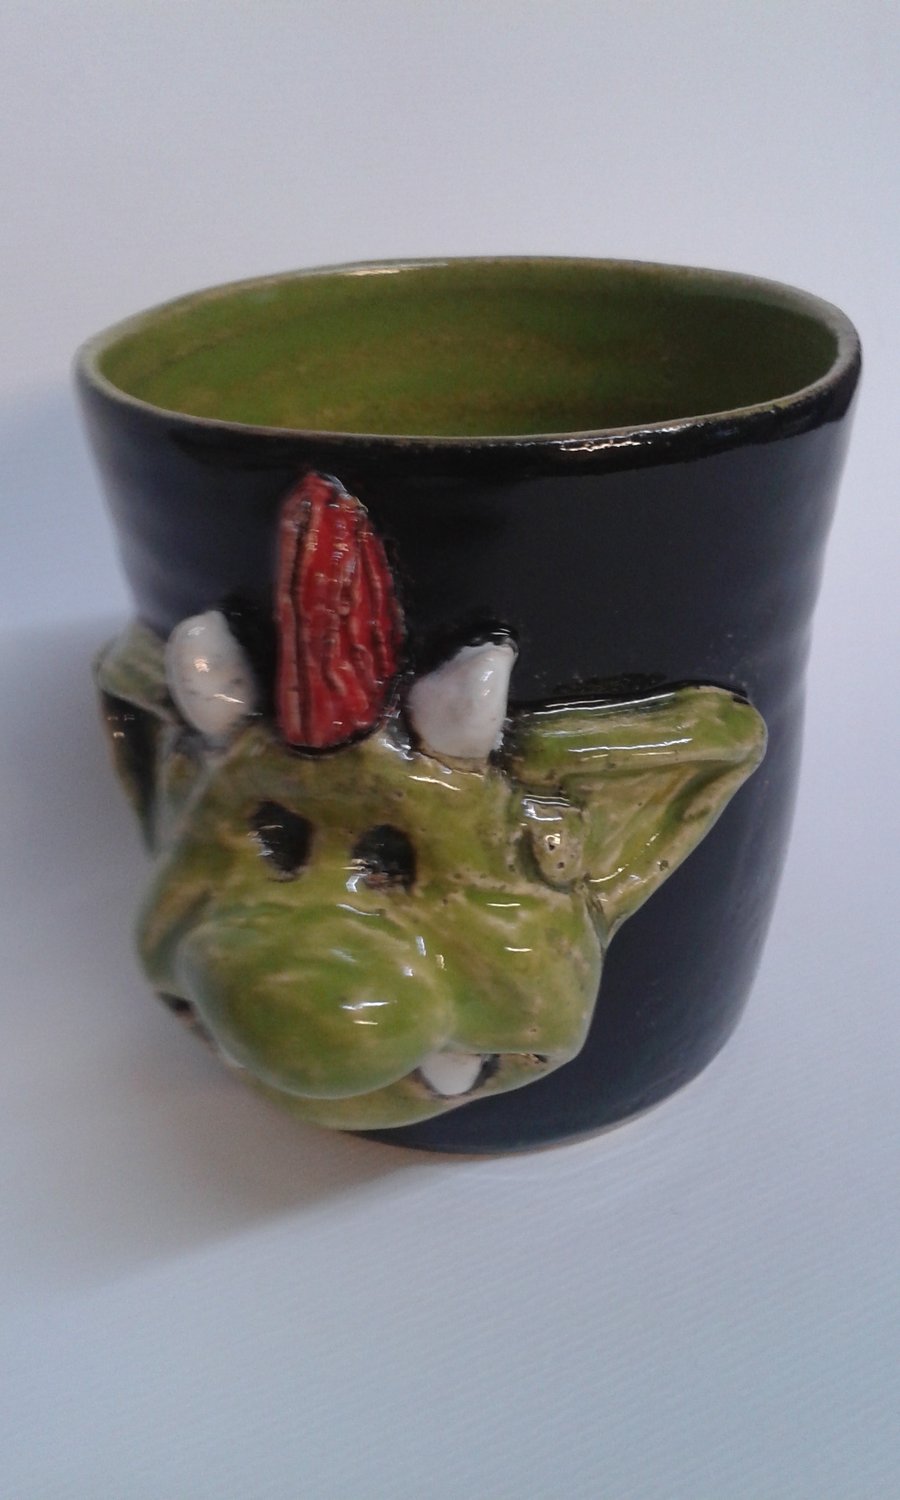 Mug with Fungus the bogeyman's son Mould, moulded on the side.